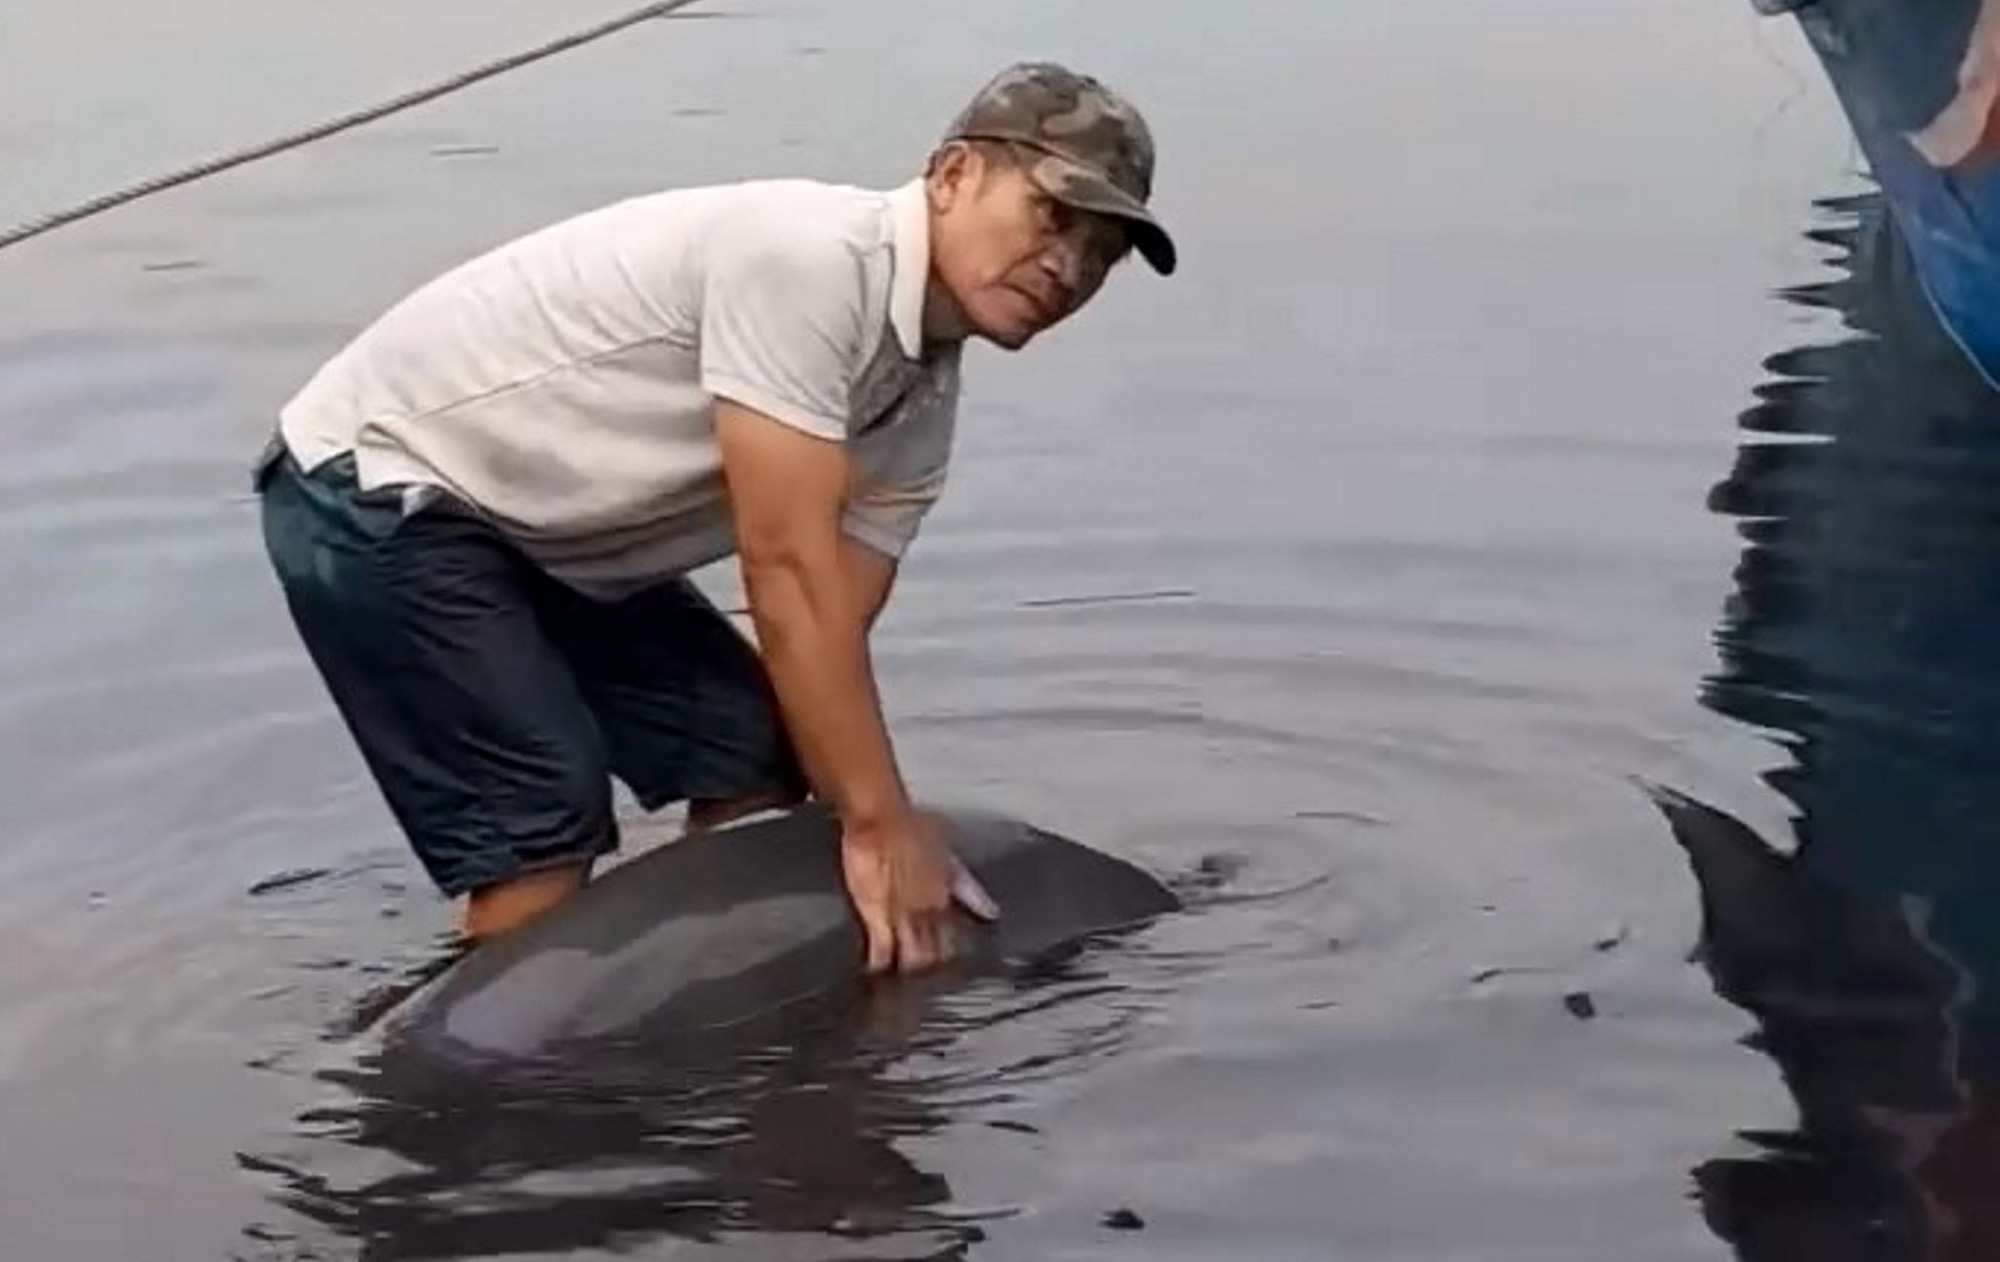 Fishermen rescue dolphin from slaughter in central Vietnam